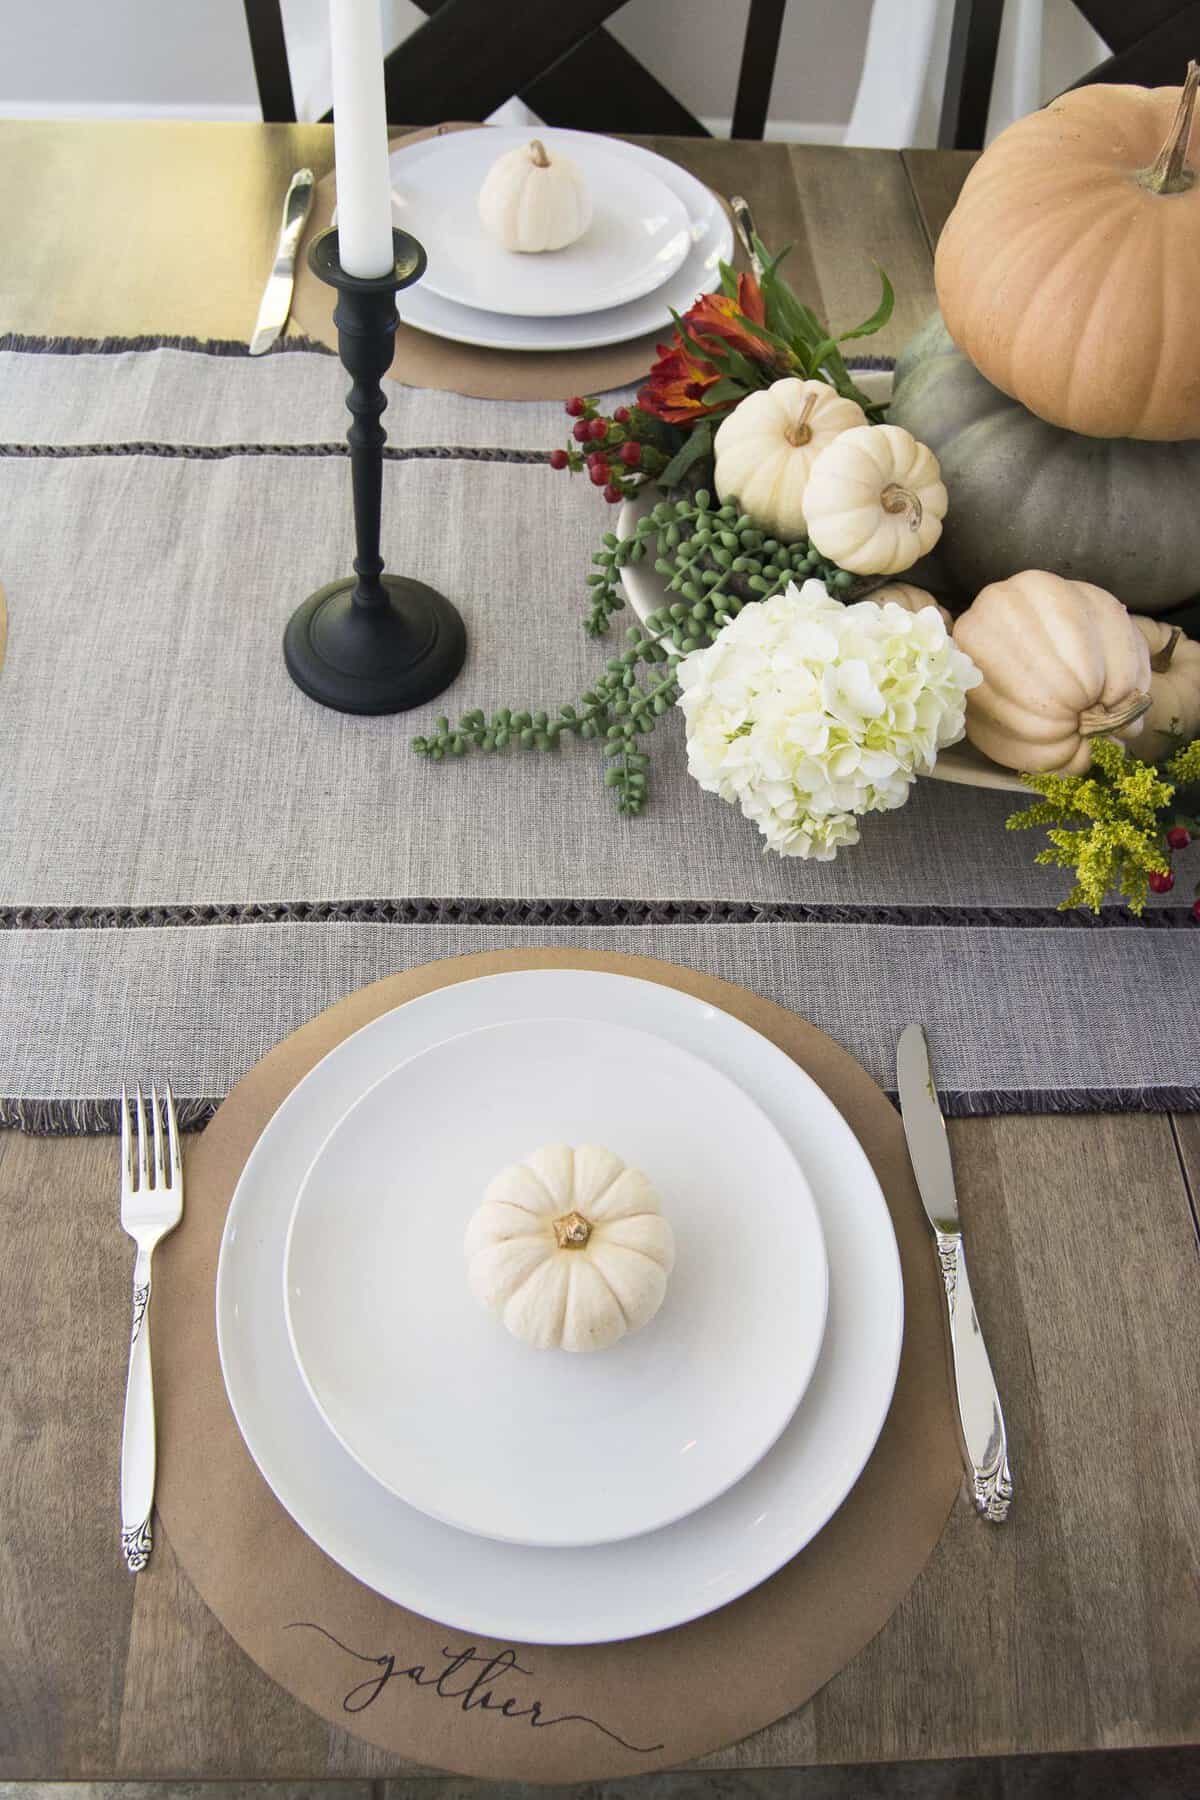 Are you looking for a simple way to decorate your thanksgiving table? I've put together three easy options to dress up your thanksgiving tablescape.